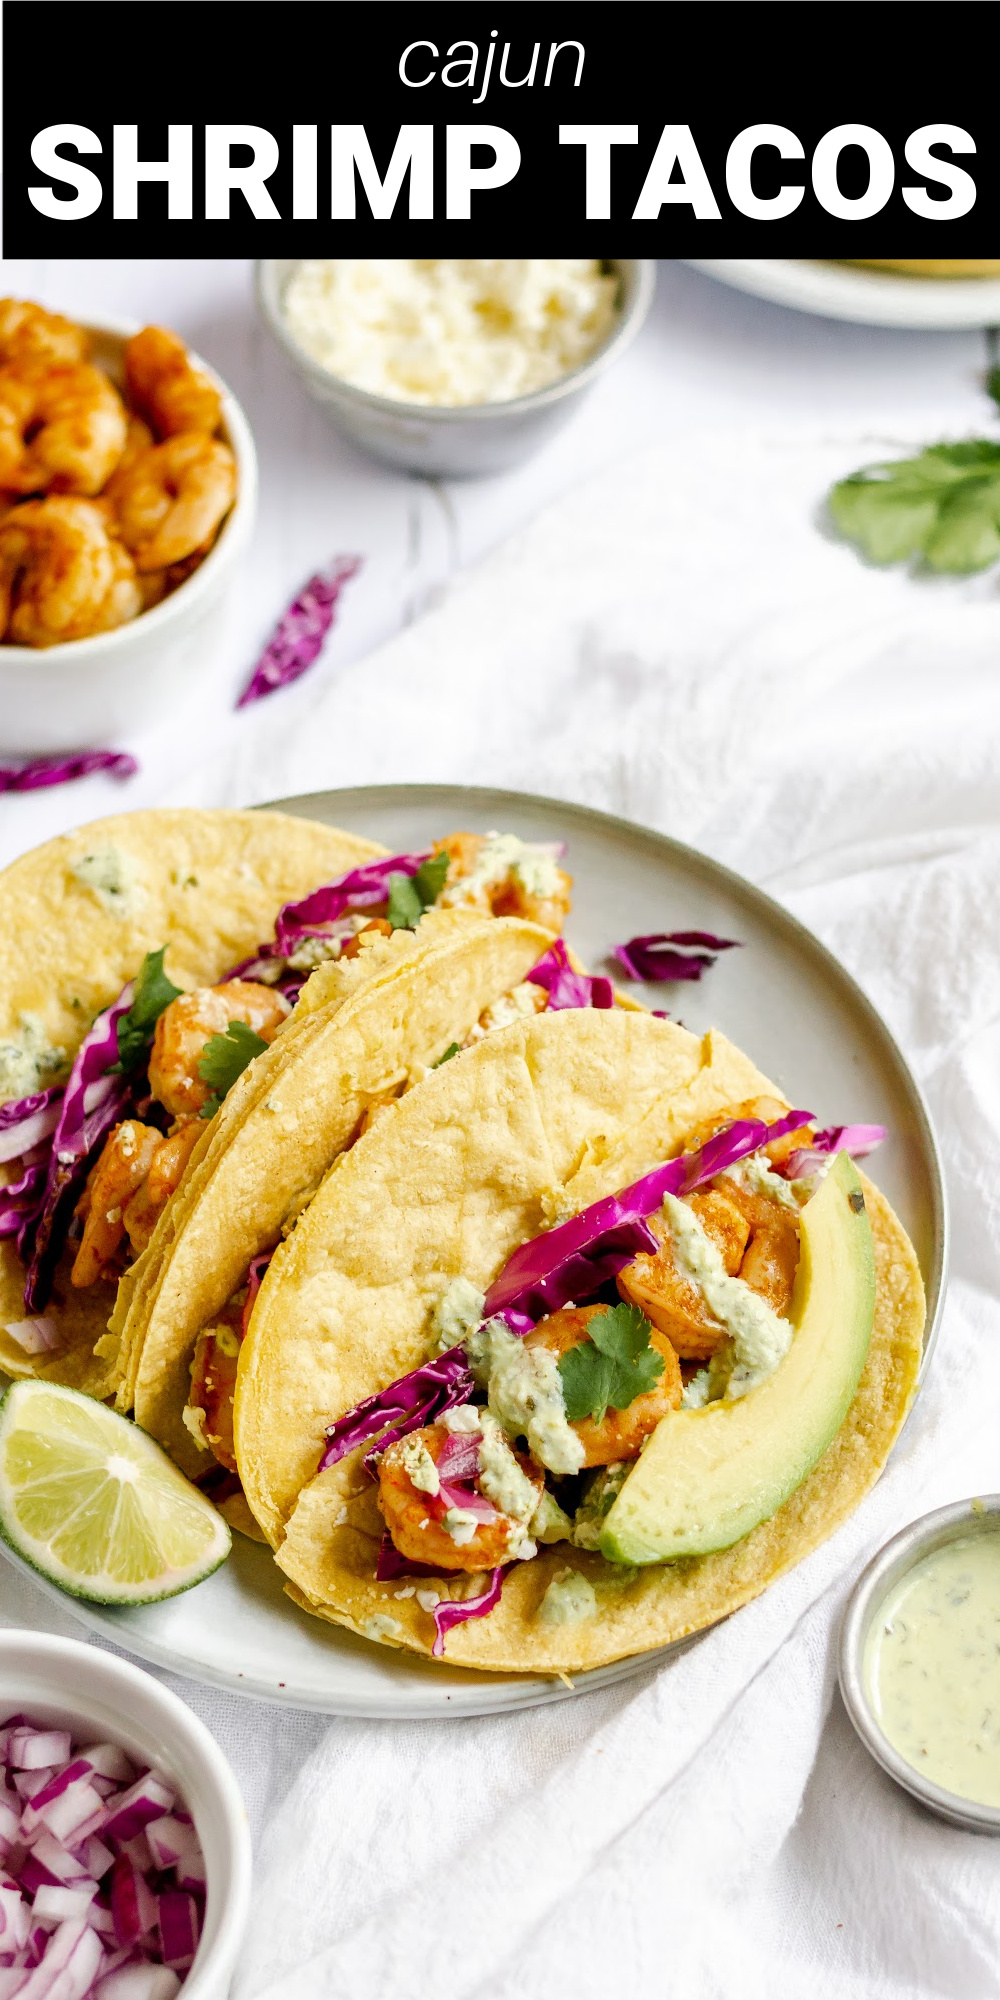 Cajun Shrimp Tacos with cilantro lime crema are bursting with amazing flavor and are a great way to change up Taco Tuesday. Pan seared shrimp seasoned with Cajun spices are nestled in a warm tortilla with a cool and refreshing homemade crema creating one delicious meal!